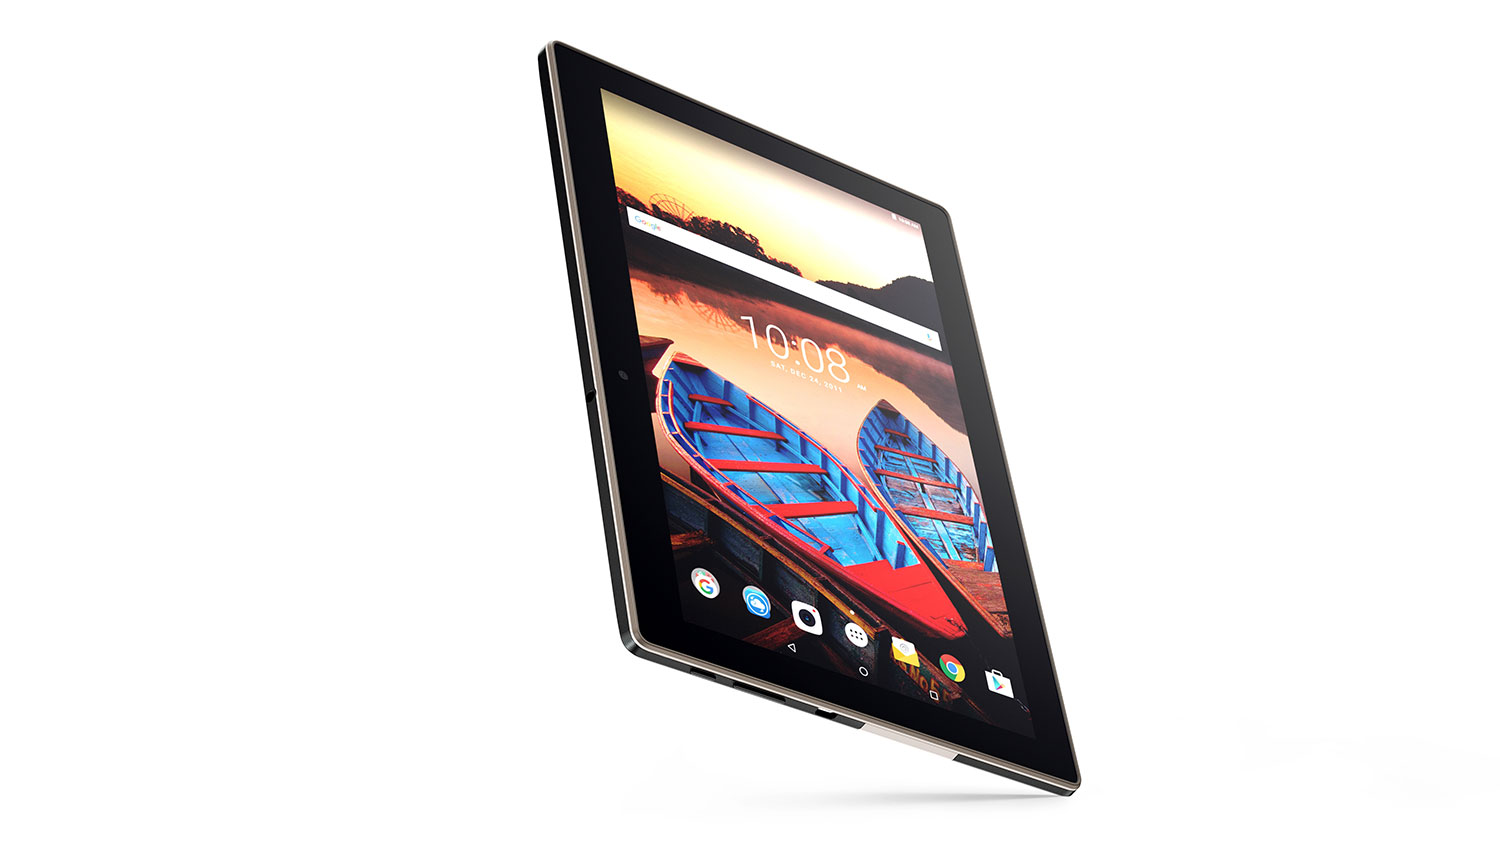 lenovo tab 3 android tablets mwc 2016 tab3 10 business 00078